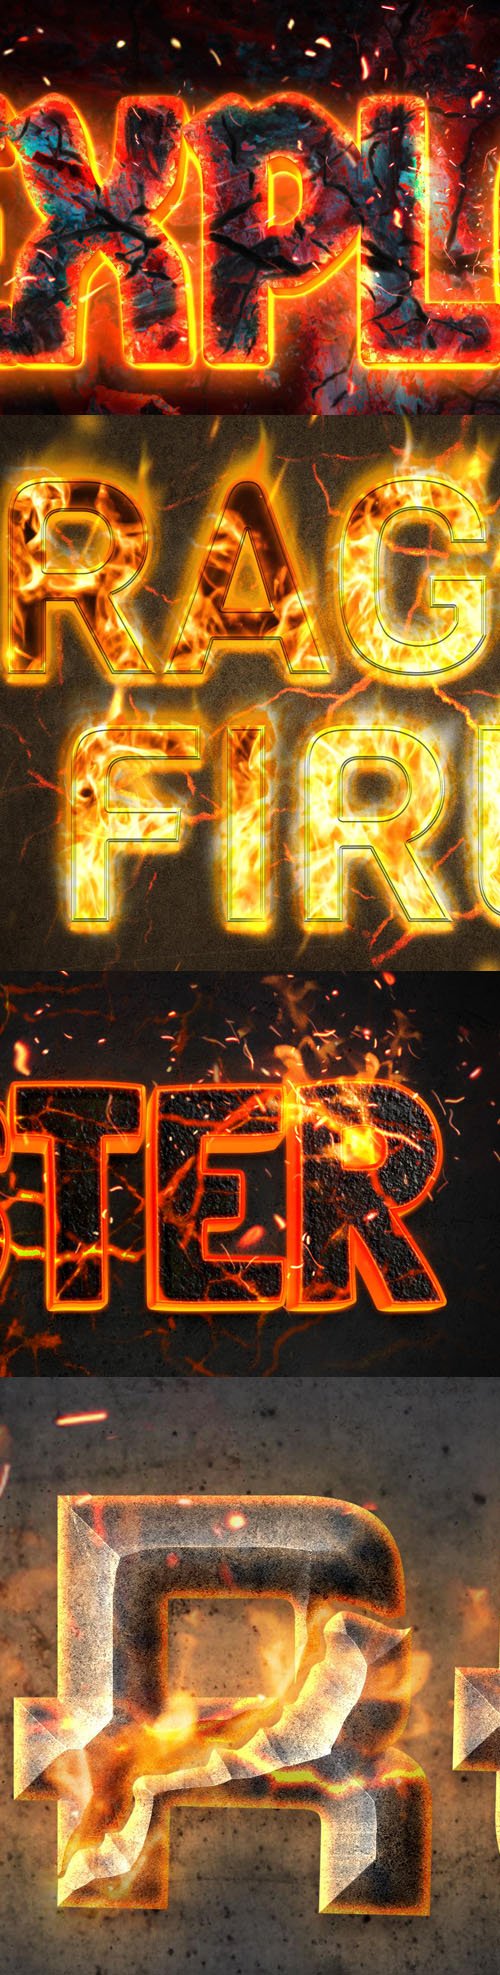 8 Fire Text Effects Templates for Photoshop